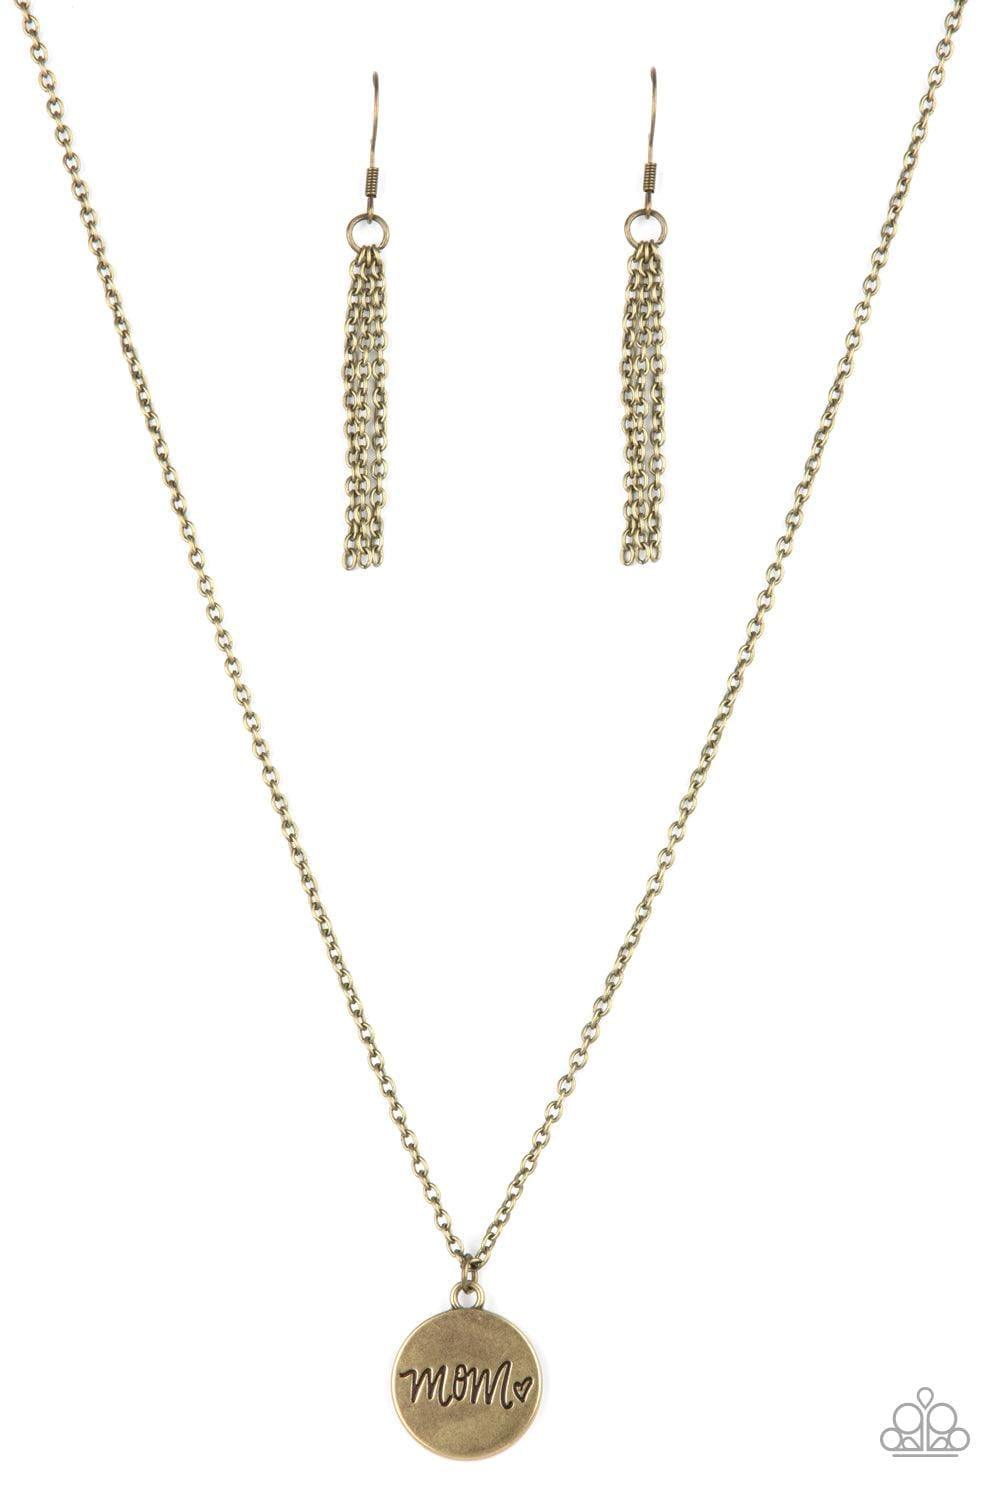 Paparazzi Accessories - The Cool Mom - Brass Necklace - Bling by JessieK